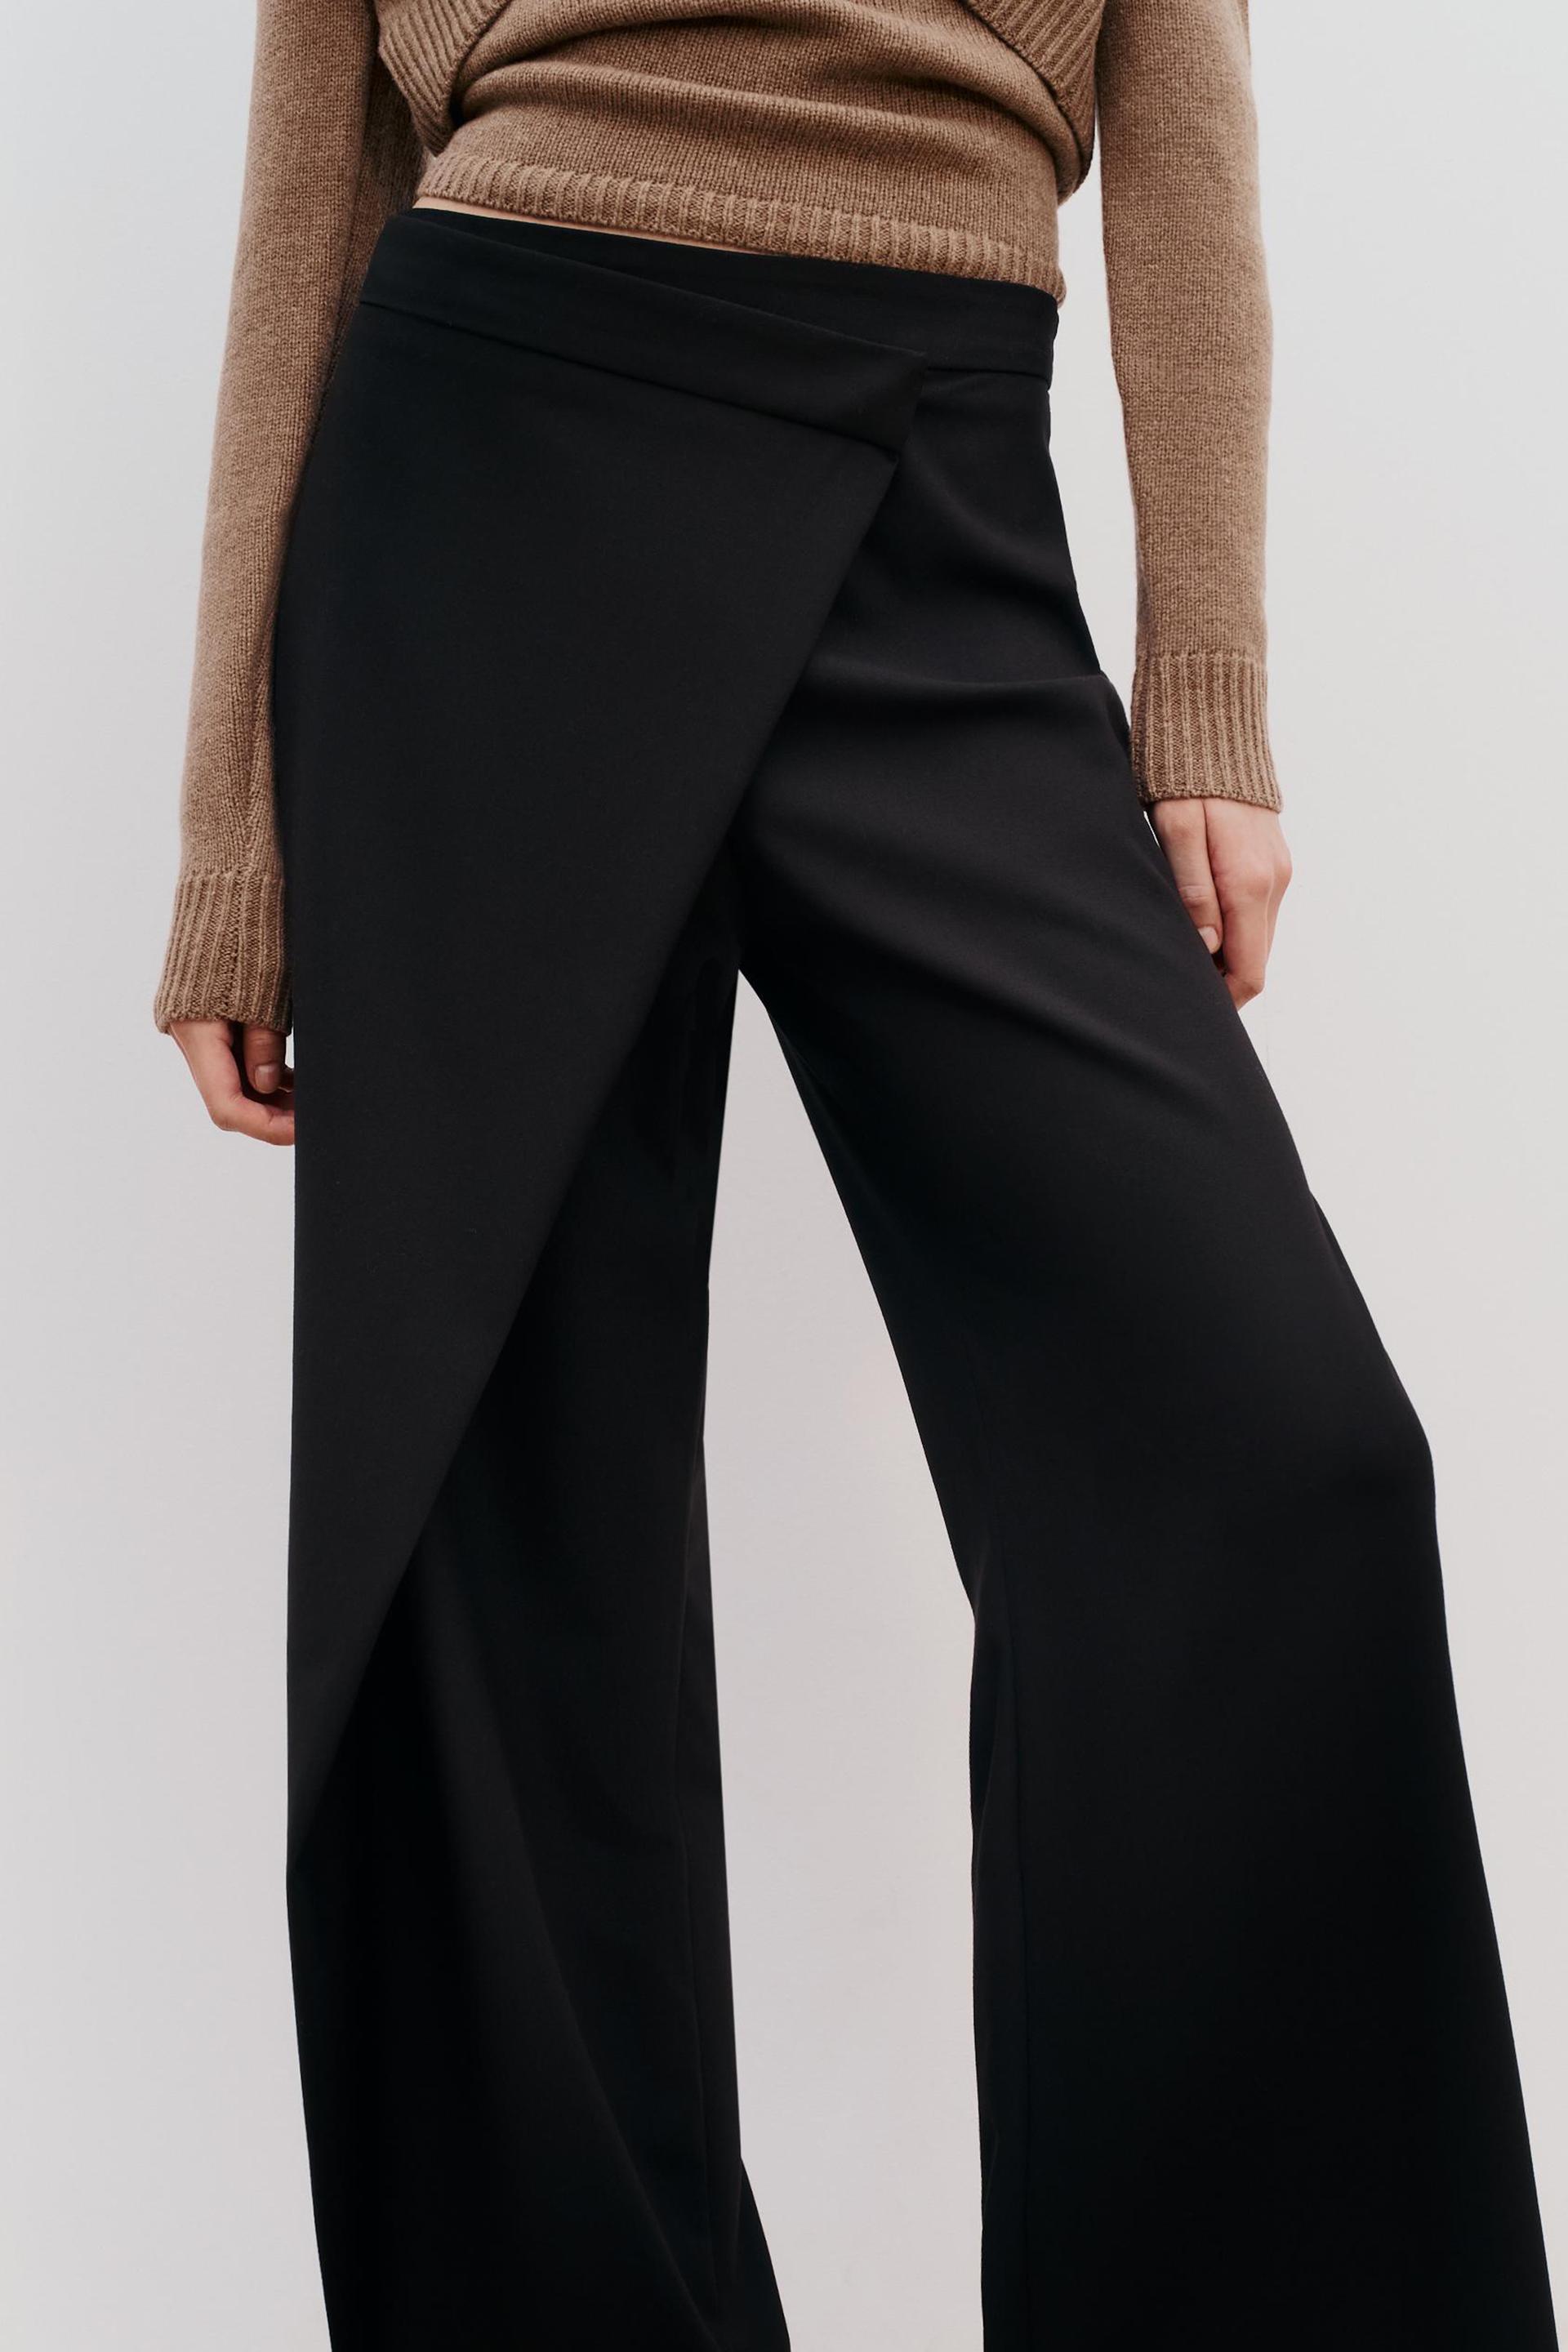 SS Zara STEPH Trouser Pants for Women Office Pants with Pocket and Zipper  INSPIRED by Zara